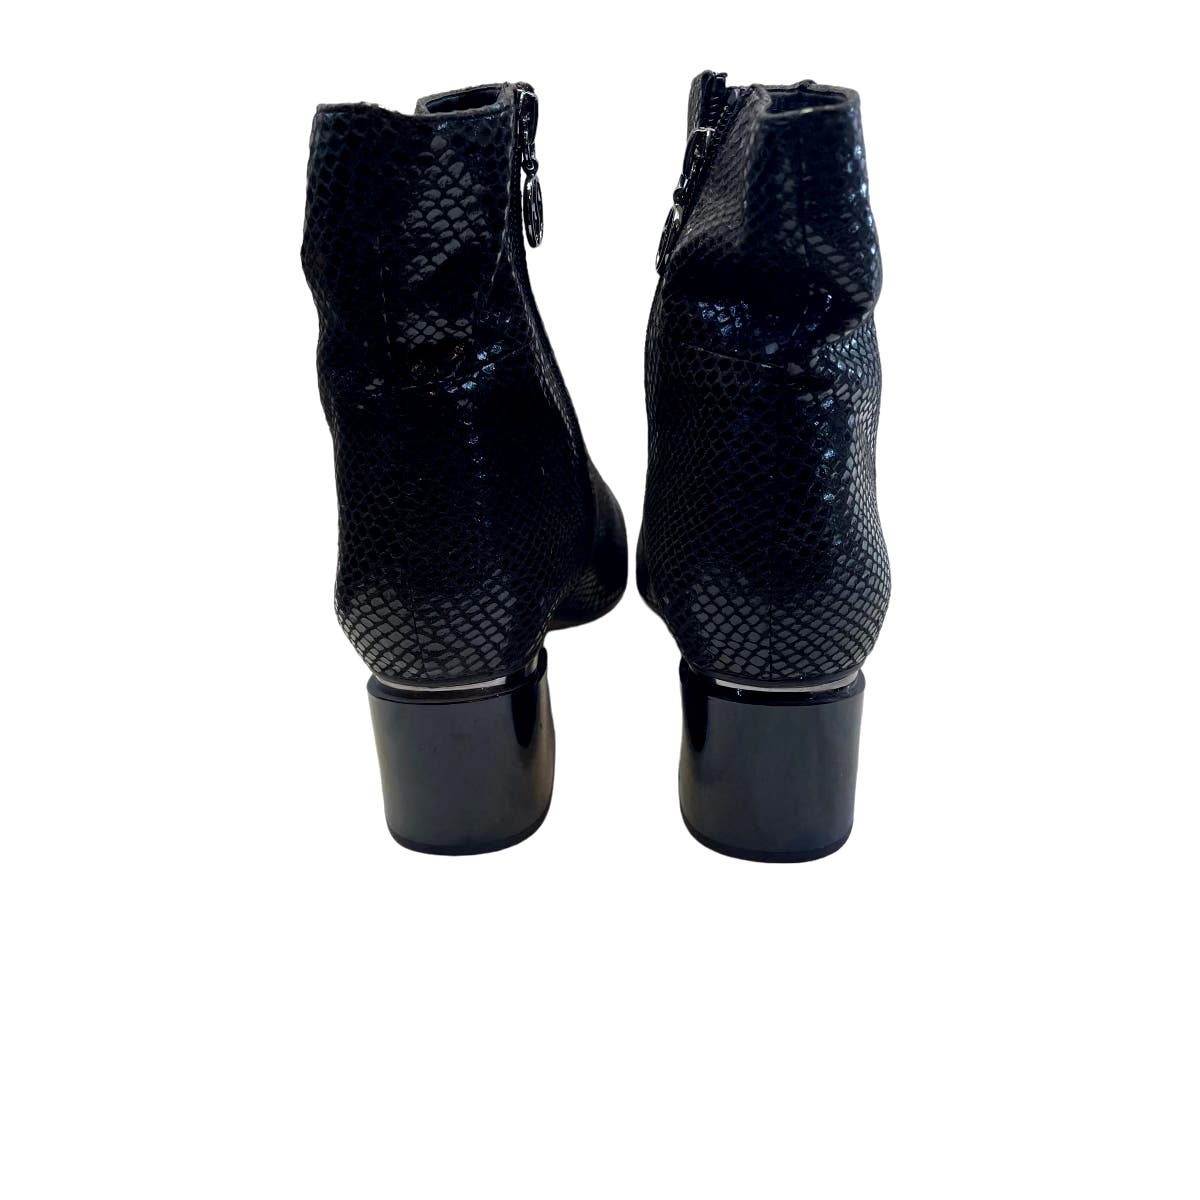 Franco Sarto Black Reptile Pattern Ankle Height Booties